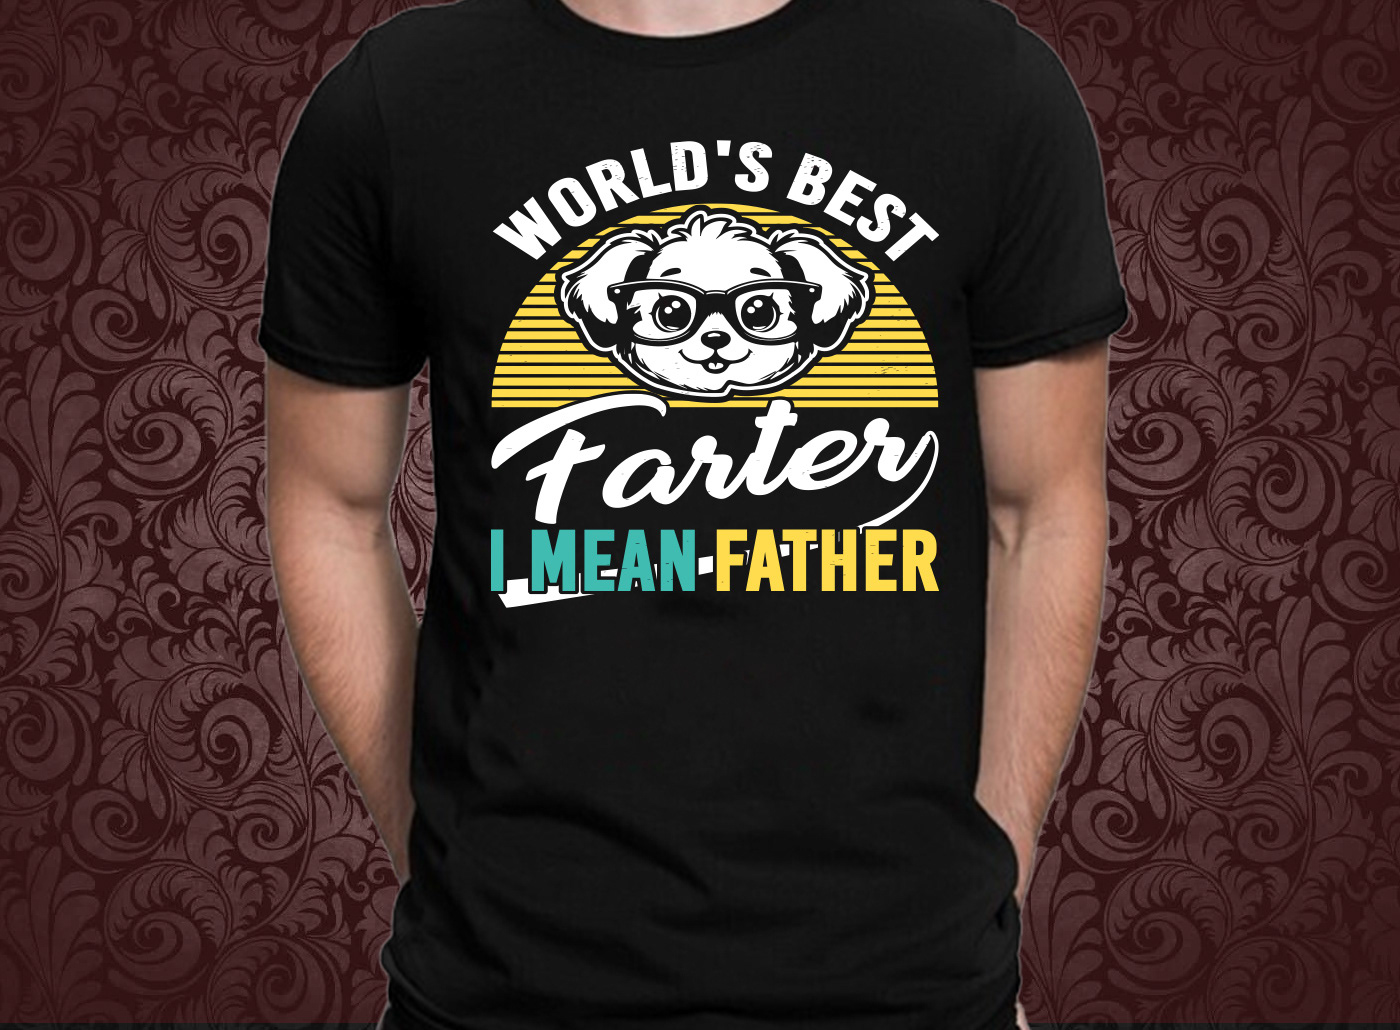 Custom T-Shirt Design For Your Own Business.